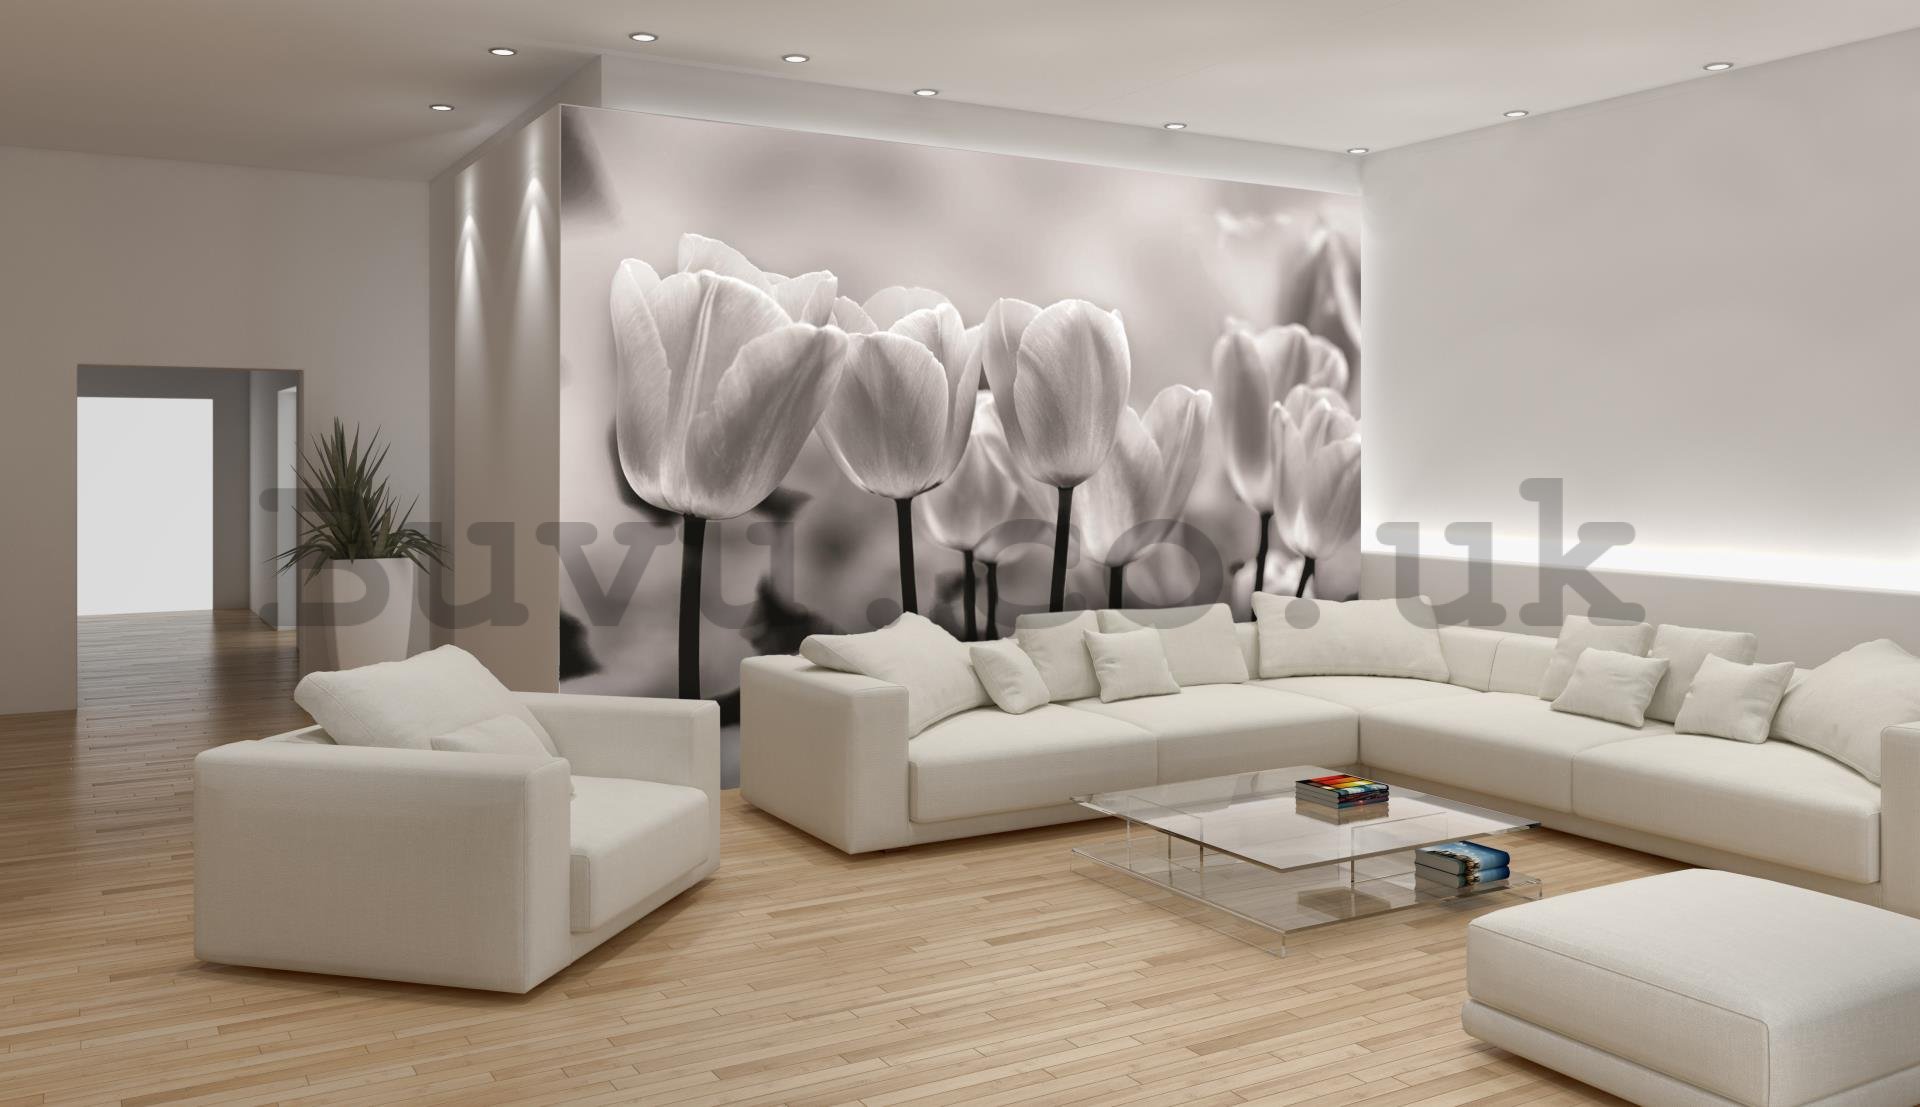 Wall Mural: White and black tulips - 254x368 cm